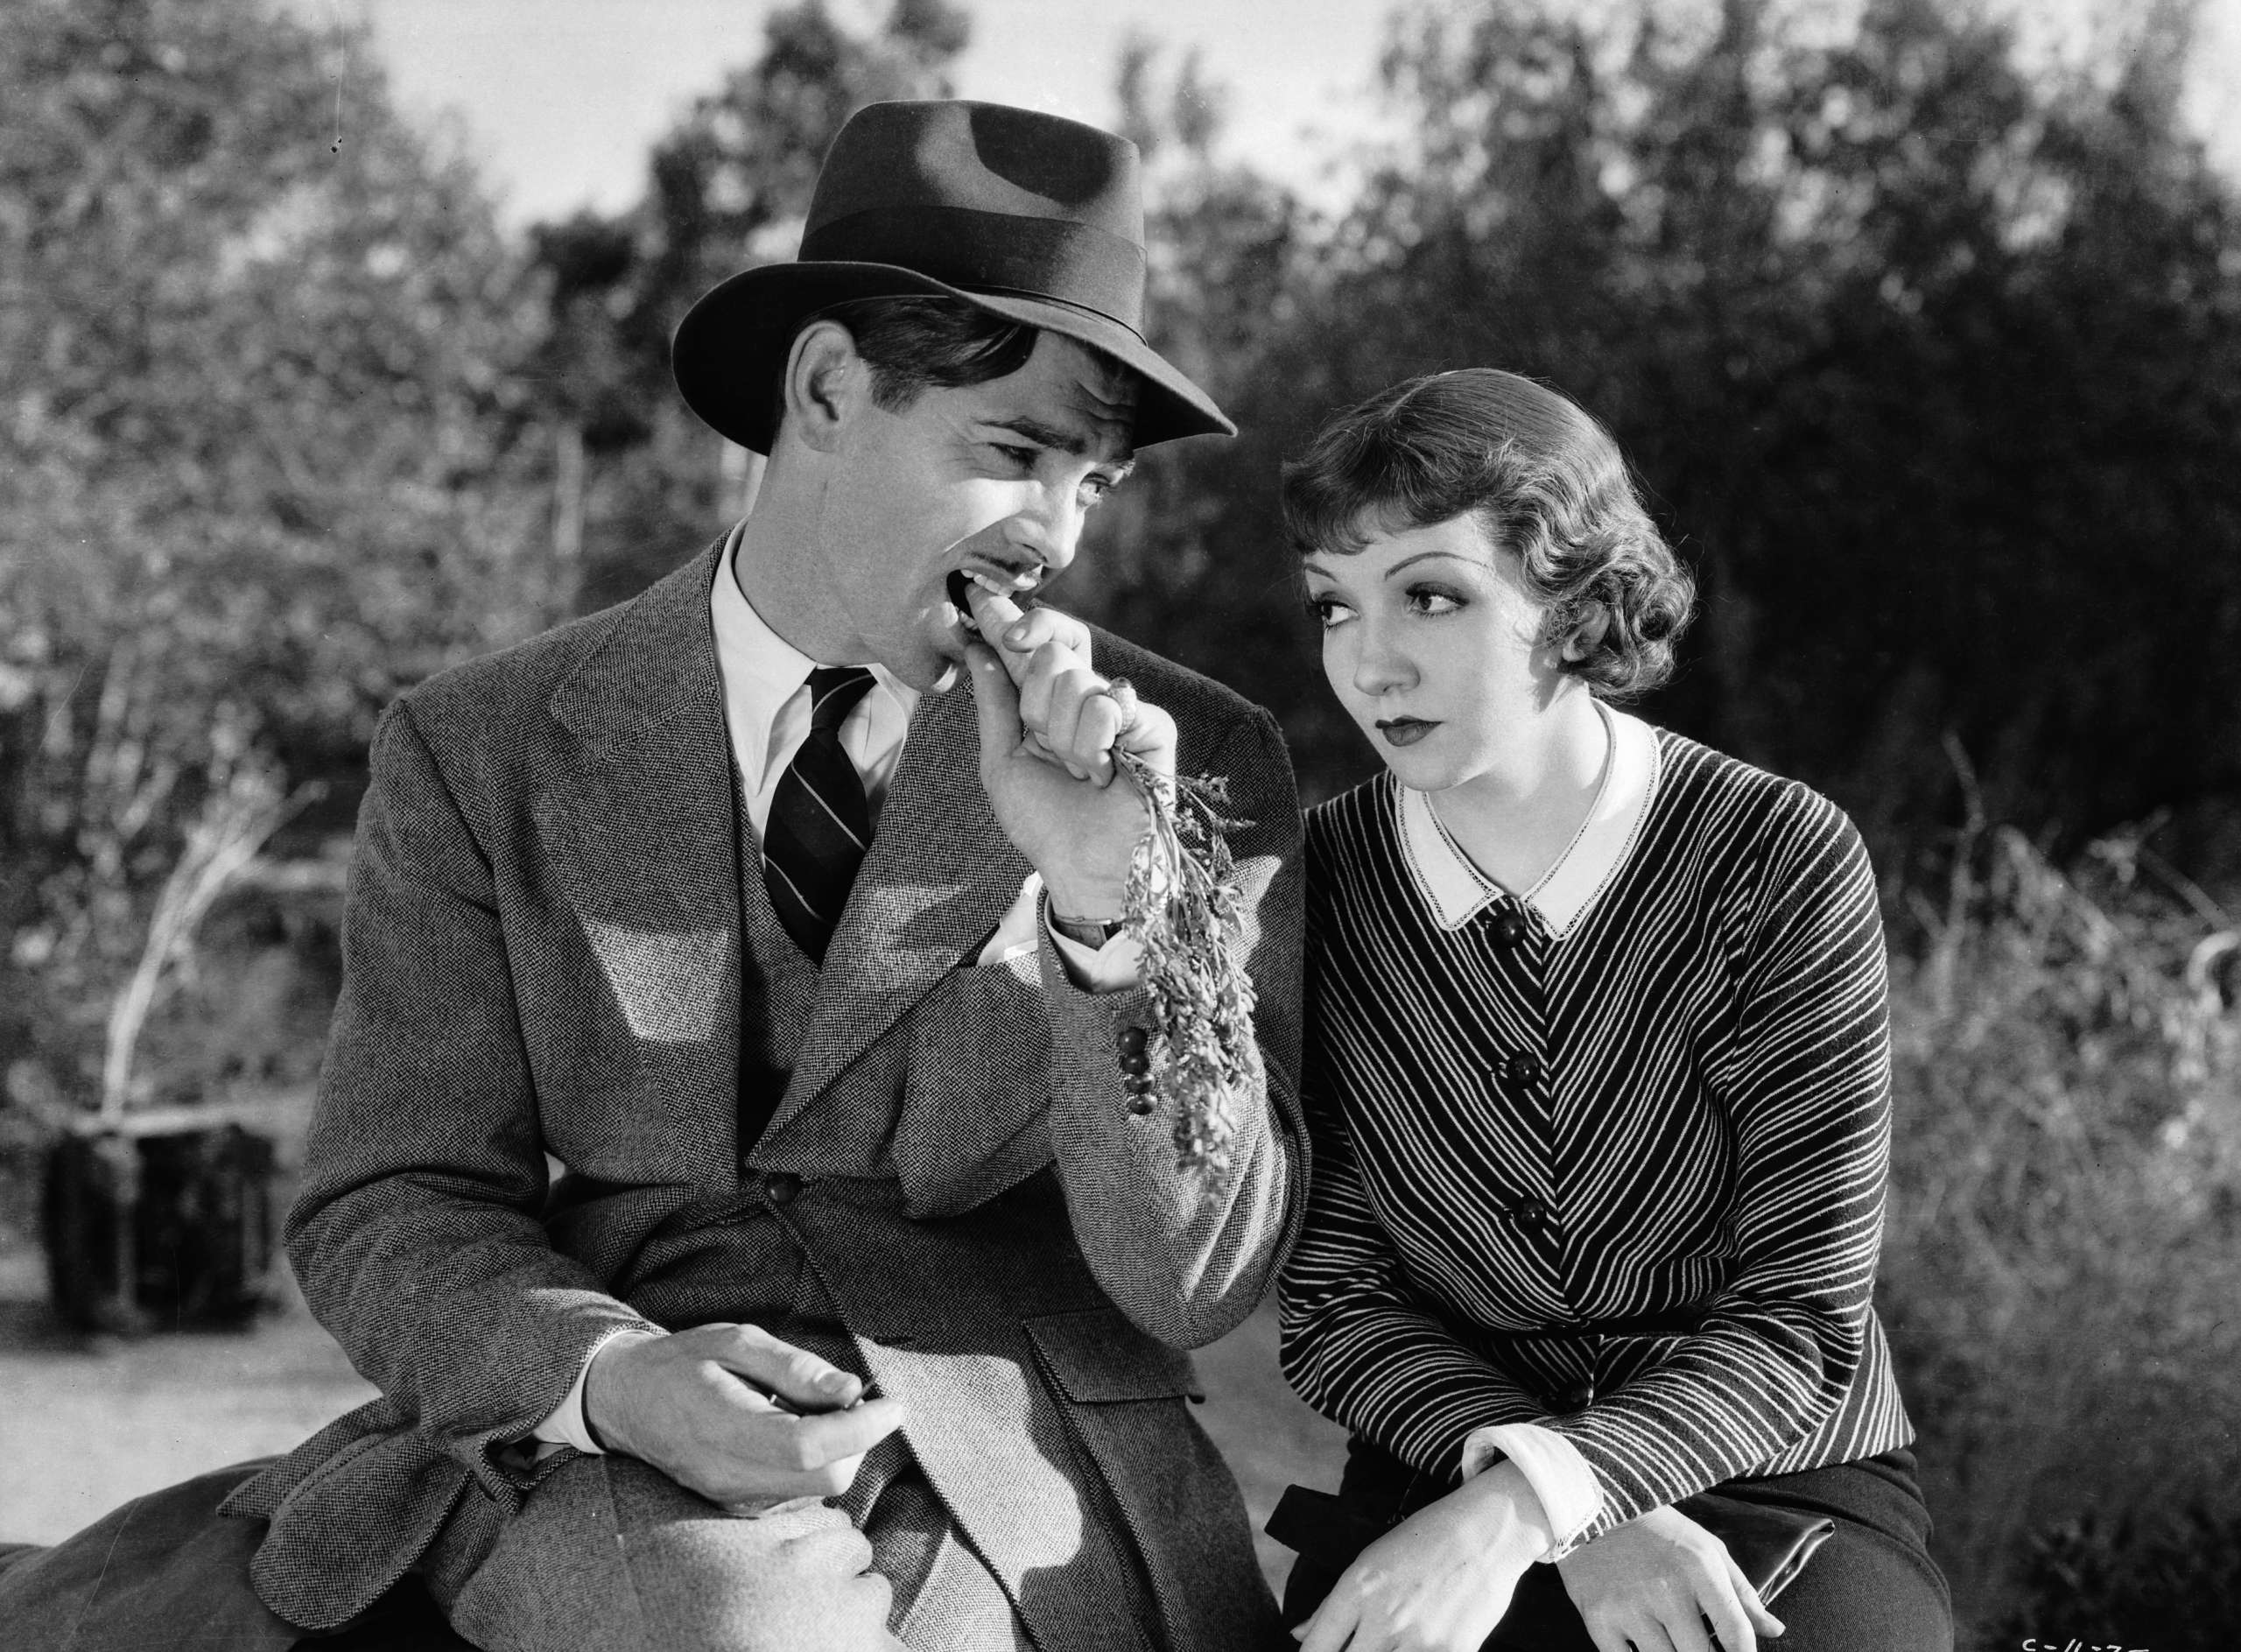 1934:  Socialite Ellie Andrews, played by Claudette Colbert (1903 - 1996) appears distracted while reporter Peter Warne, played by Clark Gable (1901 - 1960), bites nonchalantly on a carrot in Frank Capra's romantic comedy, 'It Happened One Night'.  (Photo via John Kobal Foundation/Getty Images)